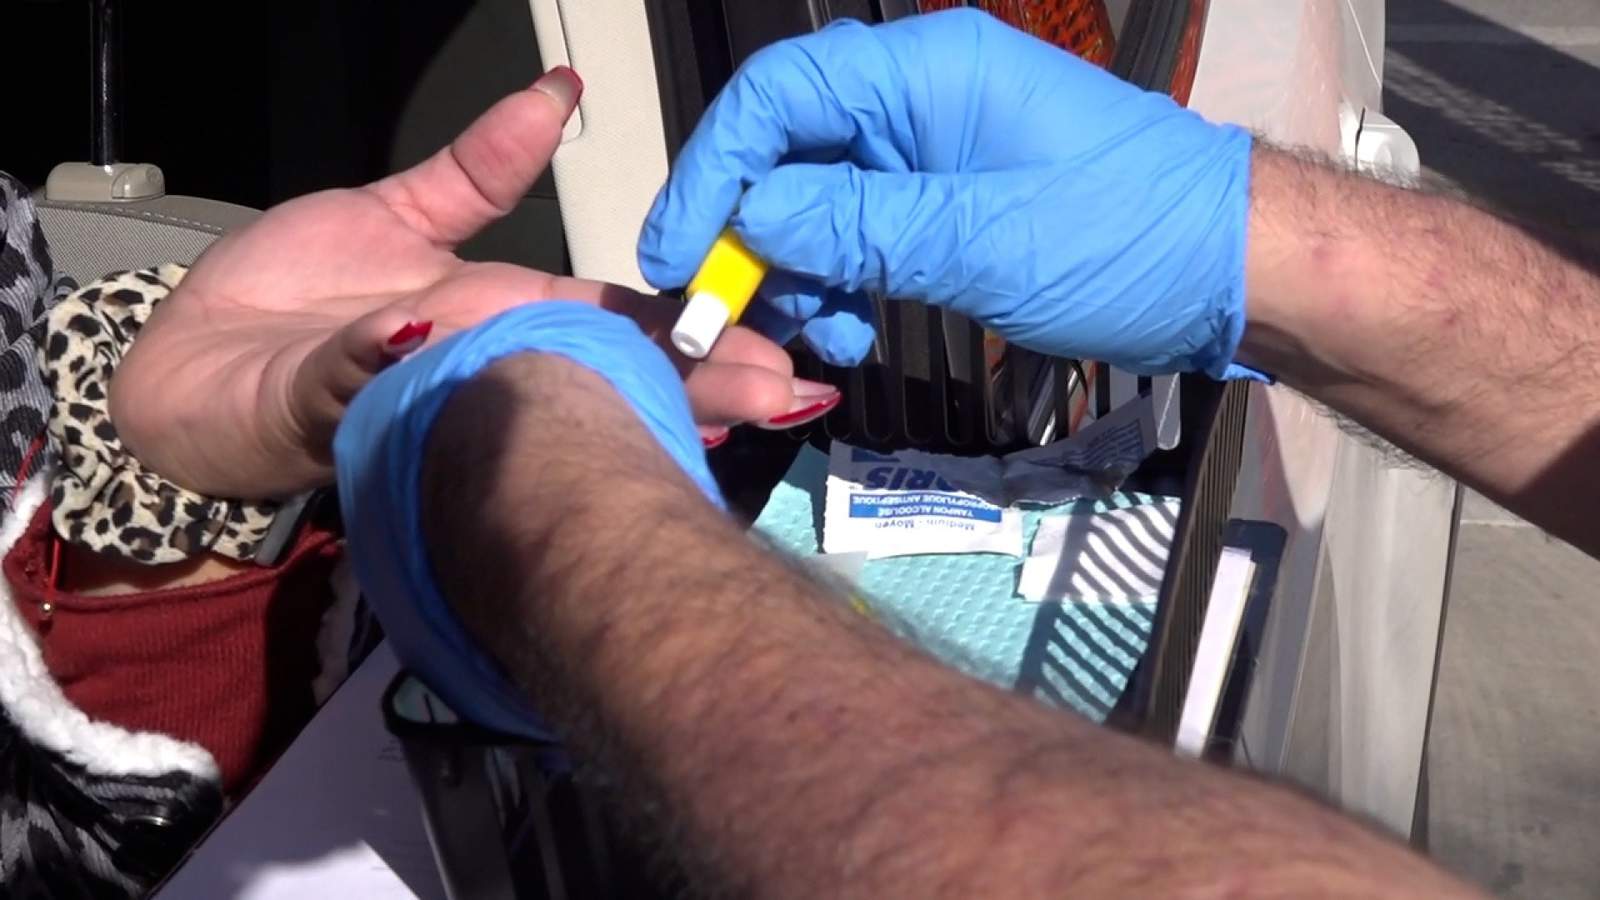 San Antonio AIDS Foundation pivots in pandemic with curbside HIV/STD testing